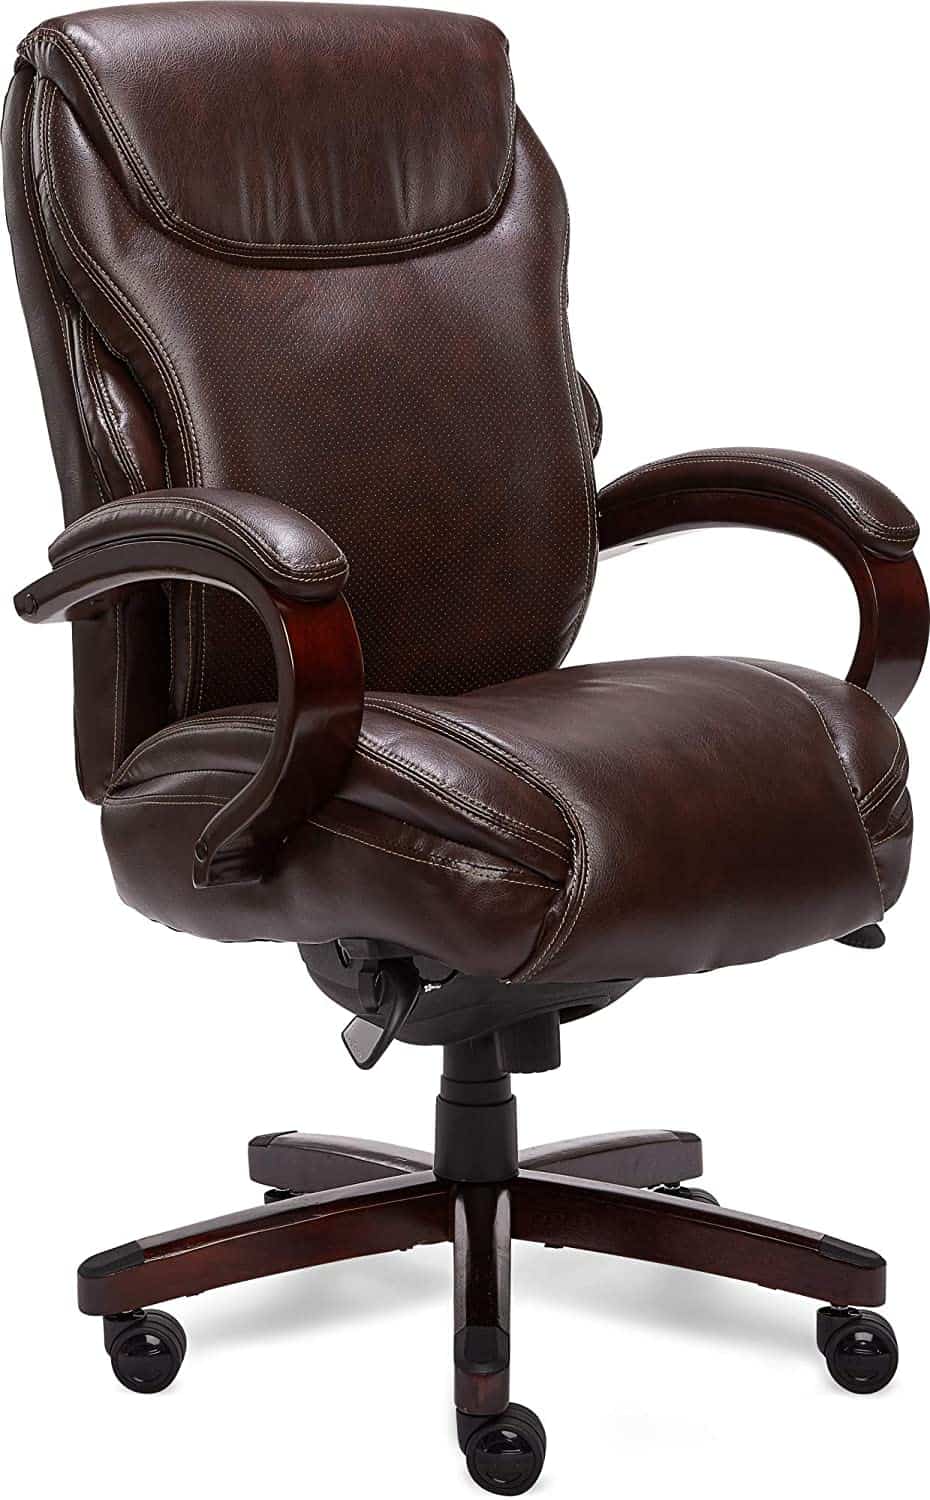 Brown La-Z-Boy Hyland Executive Bonded Leather Office Chair